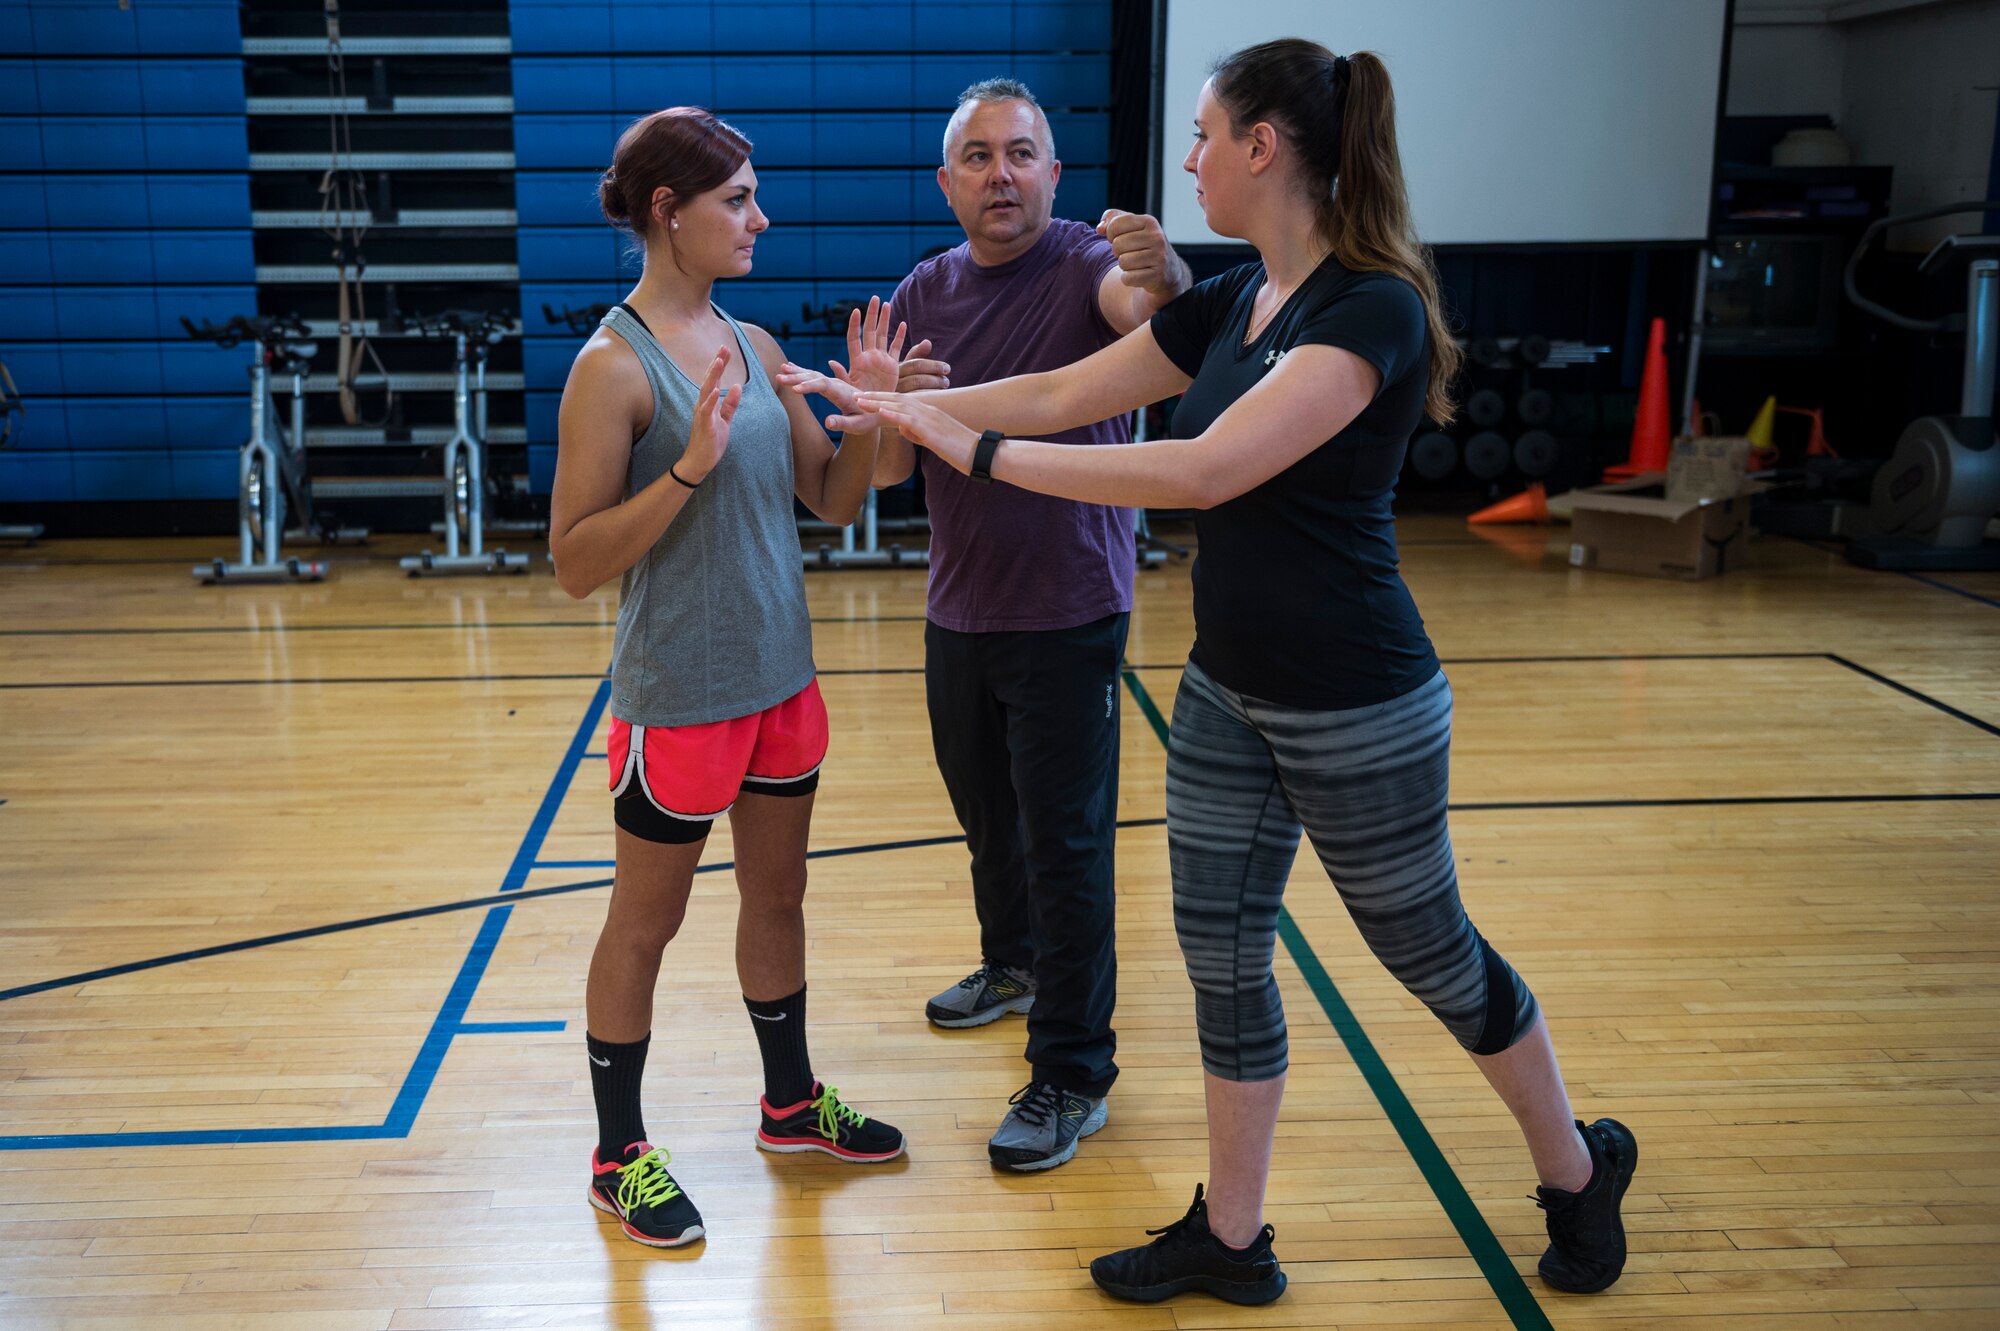 Airmen from the 107th Airlift Wing receive instruction on self-defense techniques during a class as part of Wellness Week at Niagara Falls Air Reserve Station, June 8, 2016. Wellness Week featured a variety of classes for the 107th Airmen, ranging from physical and spiritual fitness to financial responsibility. (U.S. Air National Guard photo by Staff Sgt. Ryan Campbell/released)